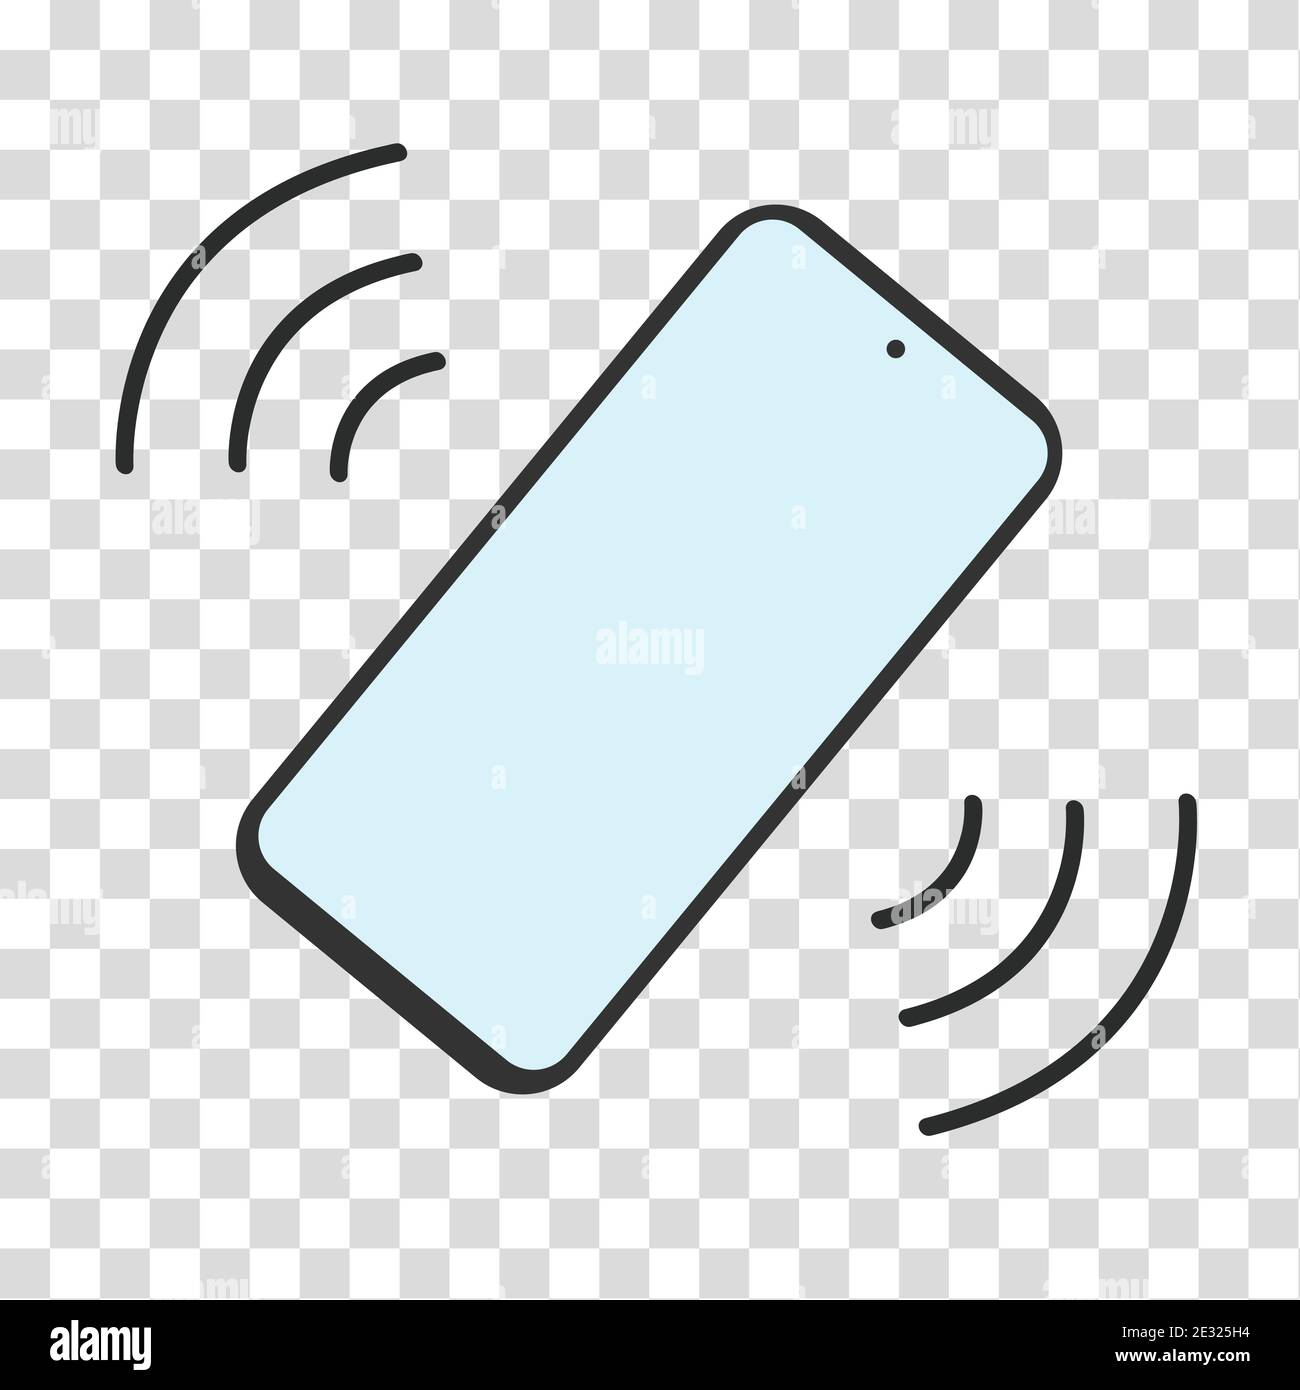 Phone Vibrate Flat Icon On Transparent Background Smartphone With Blue Screen In Silent Mode Symbol On Vibration Mode Sign For Web Vector Stock Vector Image Art Alamy